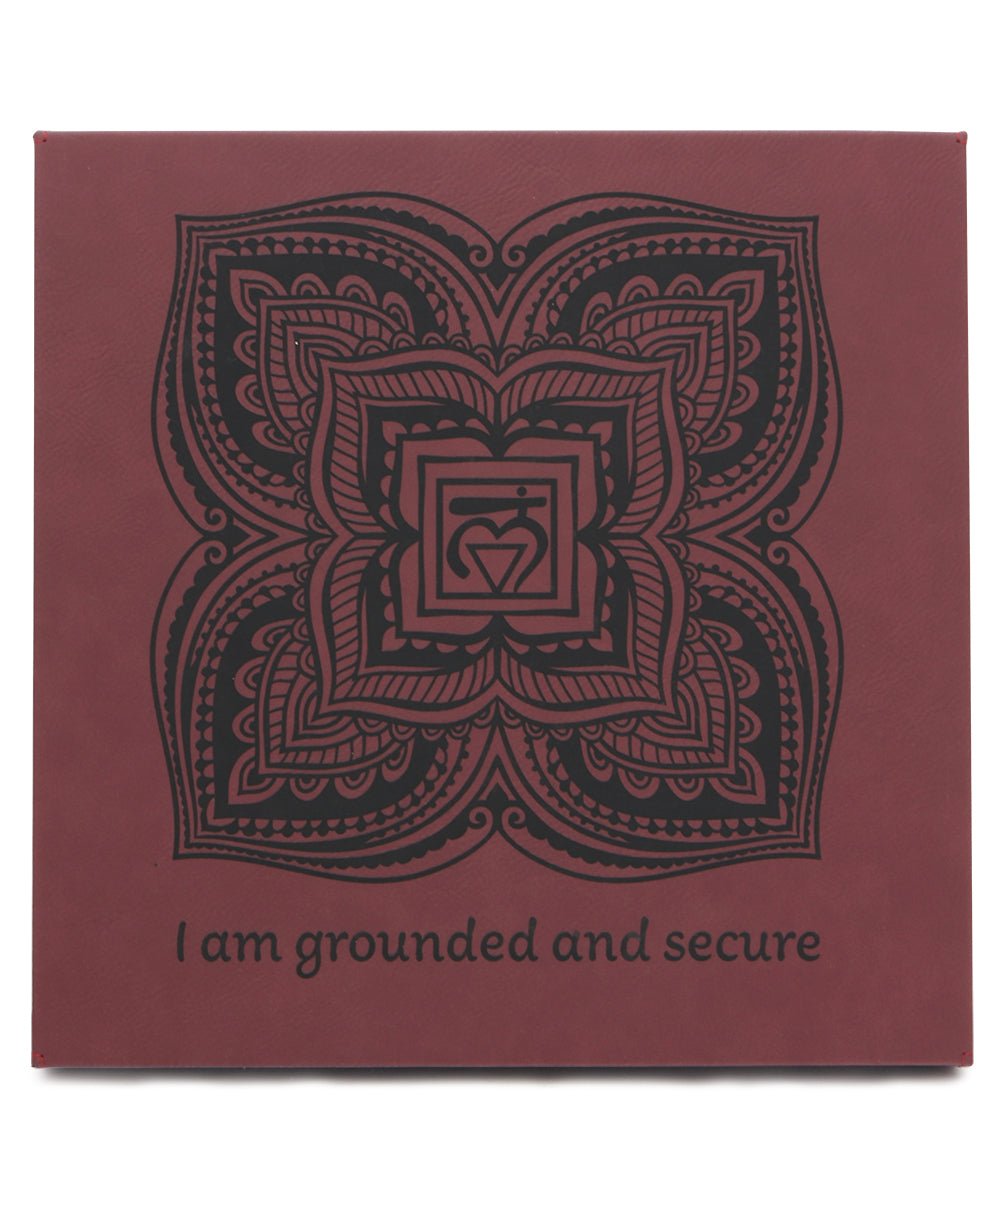 Root Chakra Affirmation Wall Art – I am Grounded and Secure - Wall Hanging